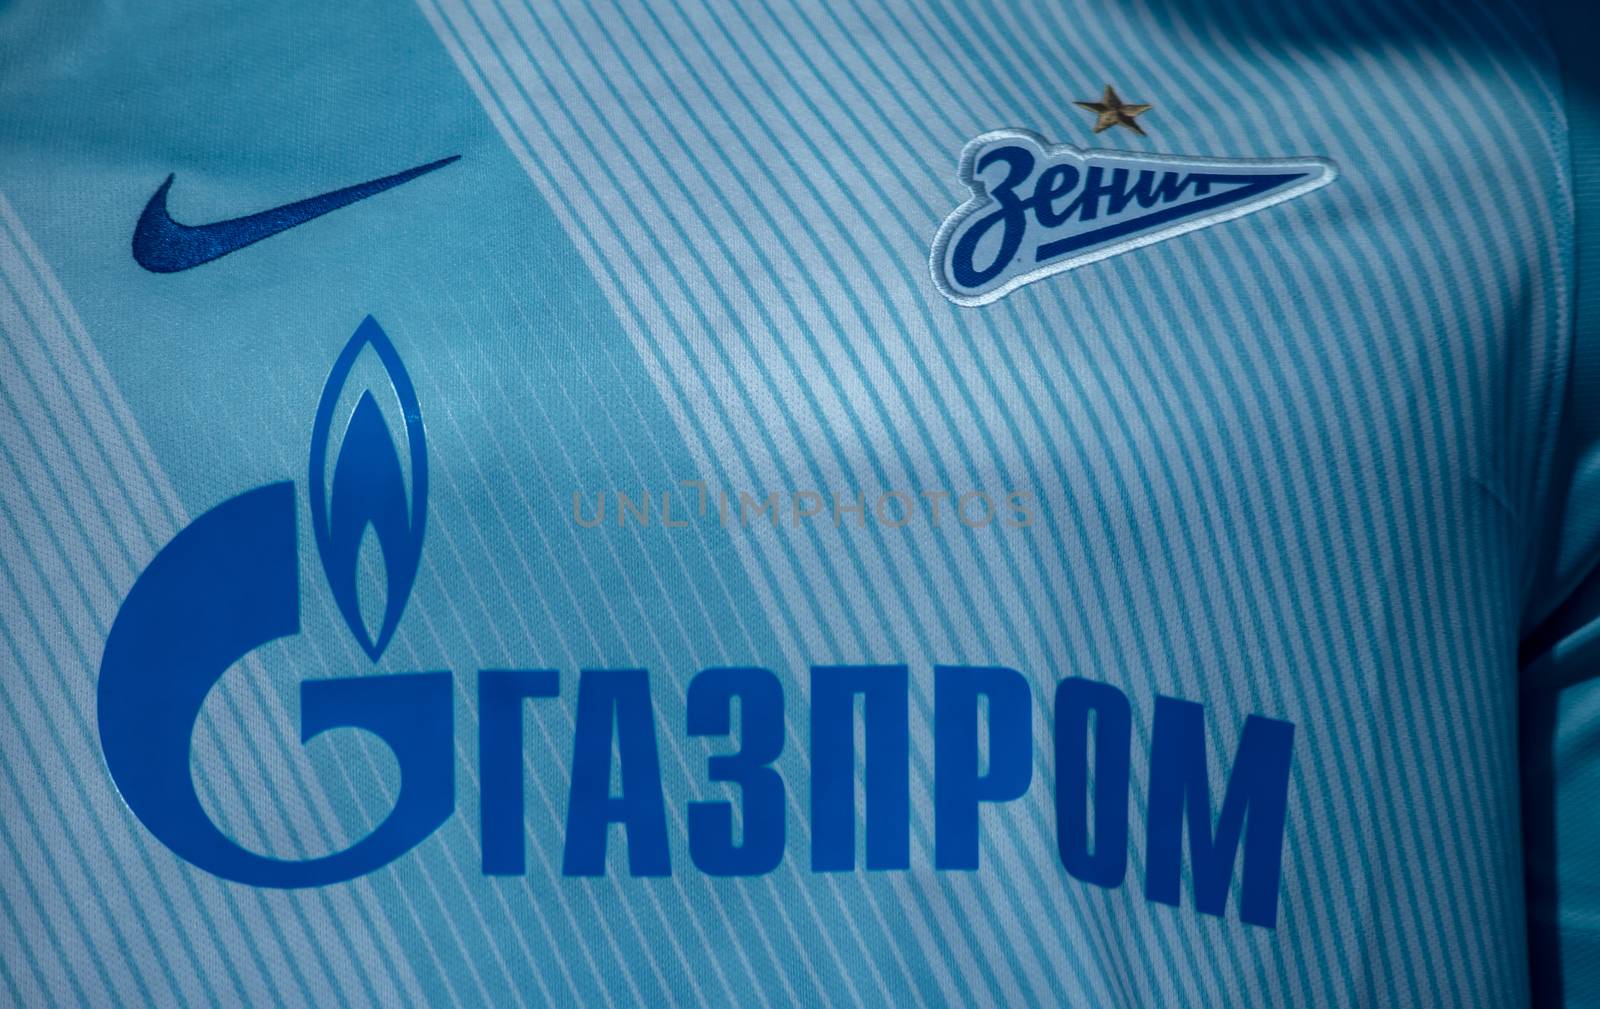 April 18, 2018. St. Petersburg, Russia. Form of football club Zenit in the window of the team store.